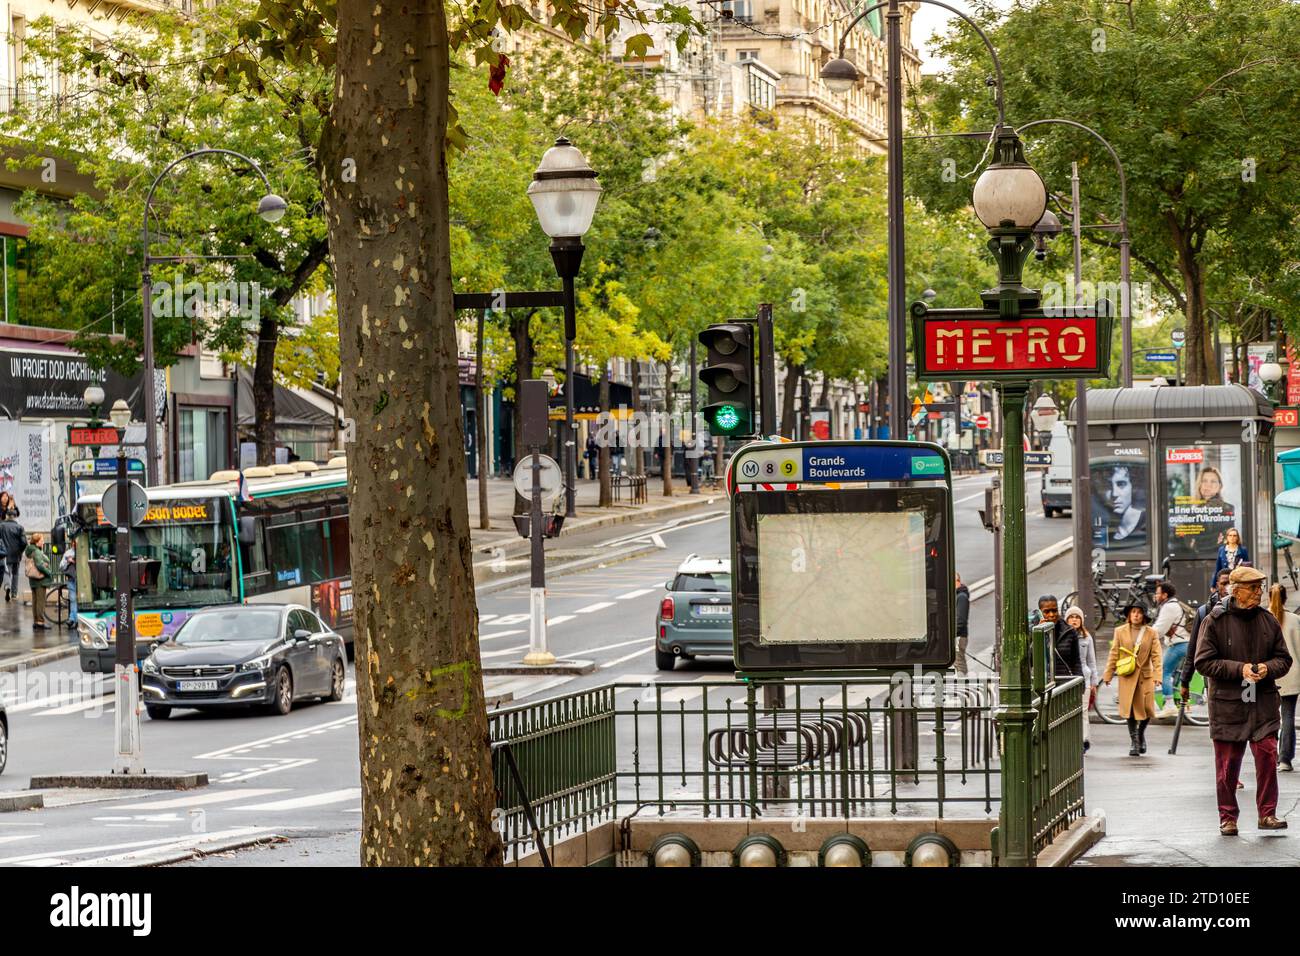 The Dervaux Metro totems at the entrance to Grands Boulevards Metro station in the 9th arrondissement of Paris, France Stock Photo